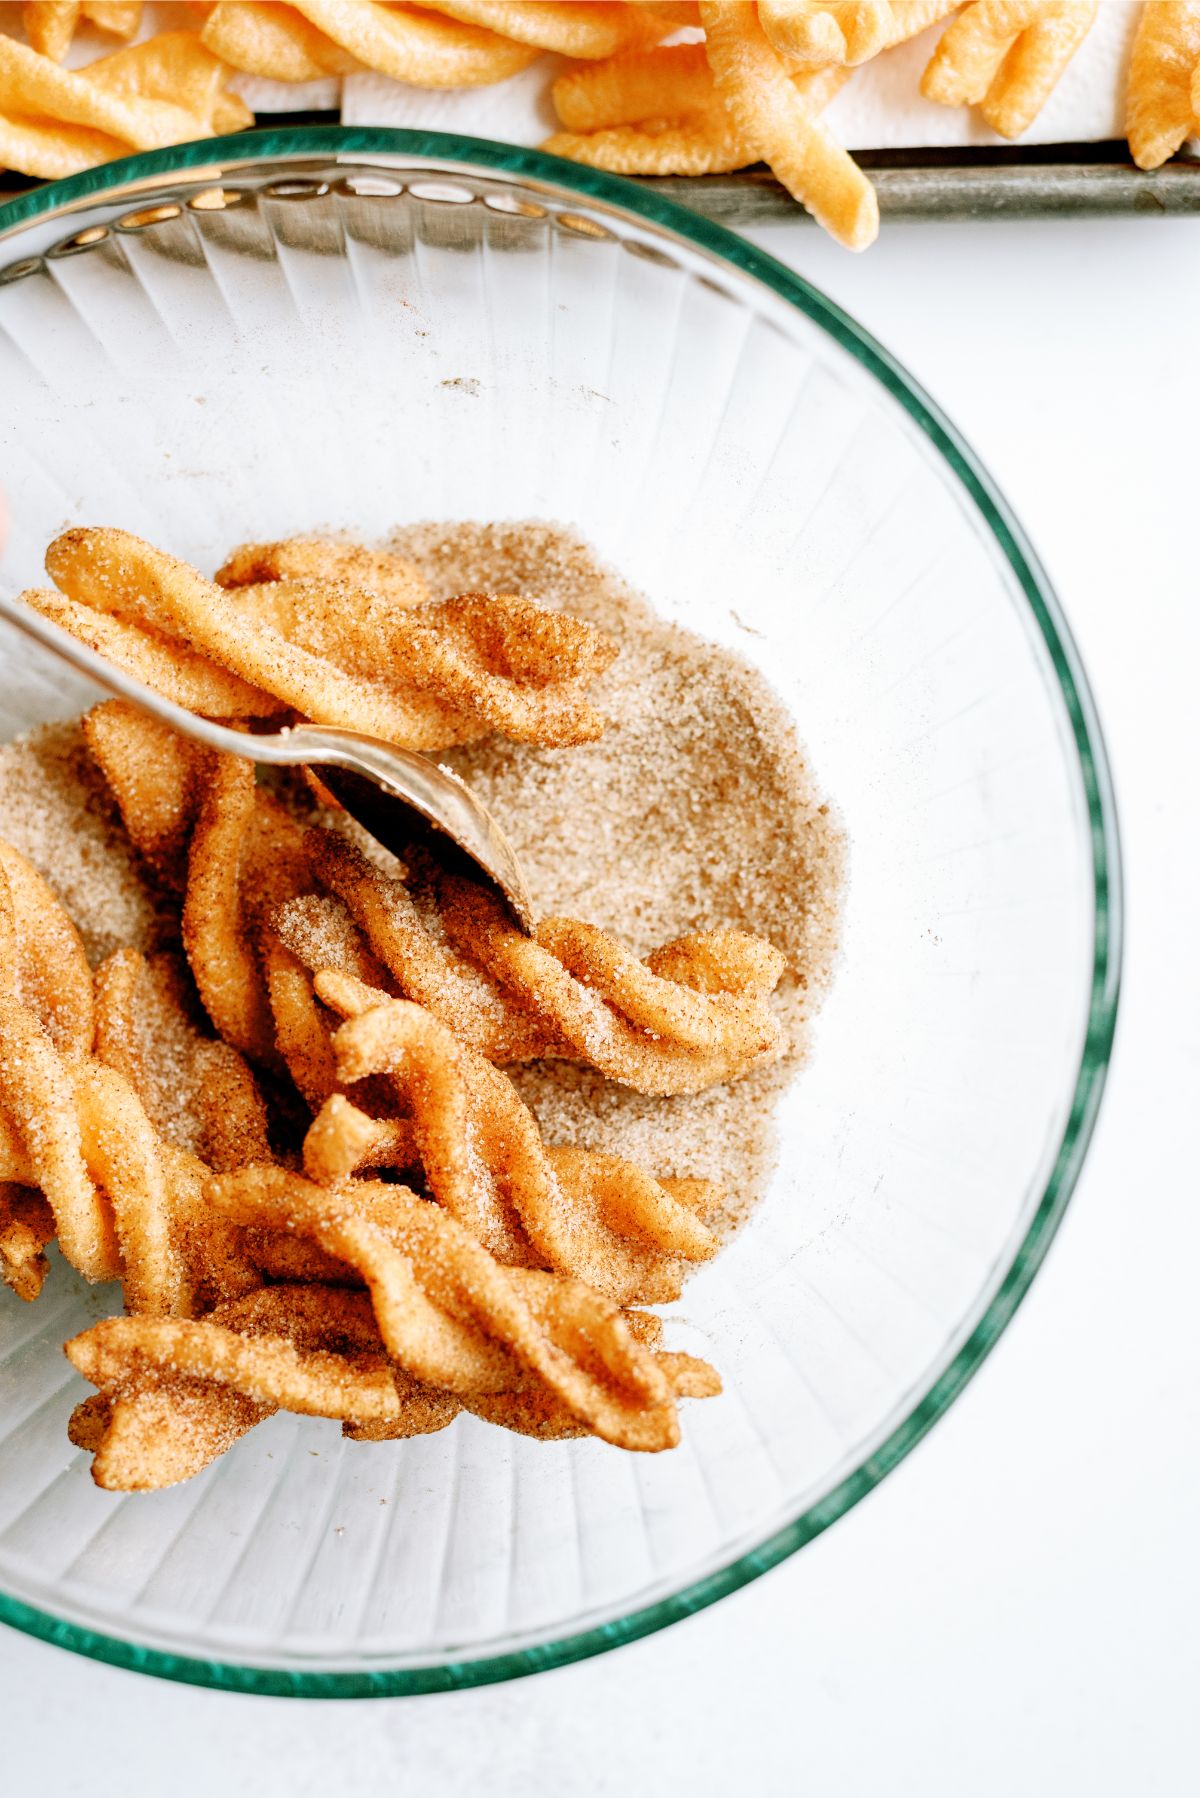 Duros tossed in a bowl of cinnamon and sugar